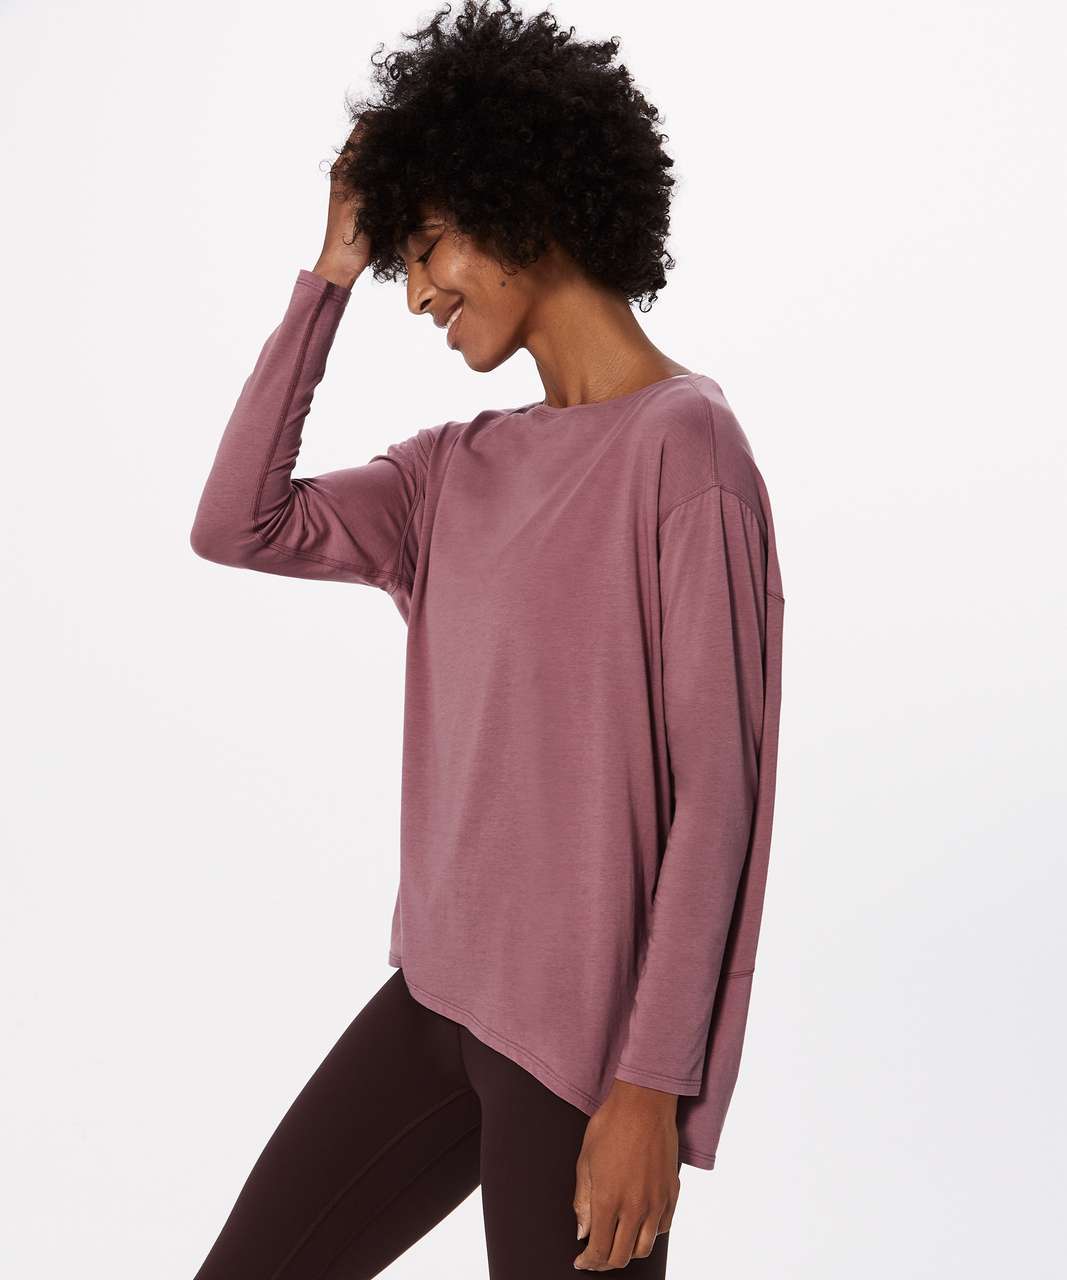 Lululemon Back In Action Long Sleeve - Figue